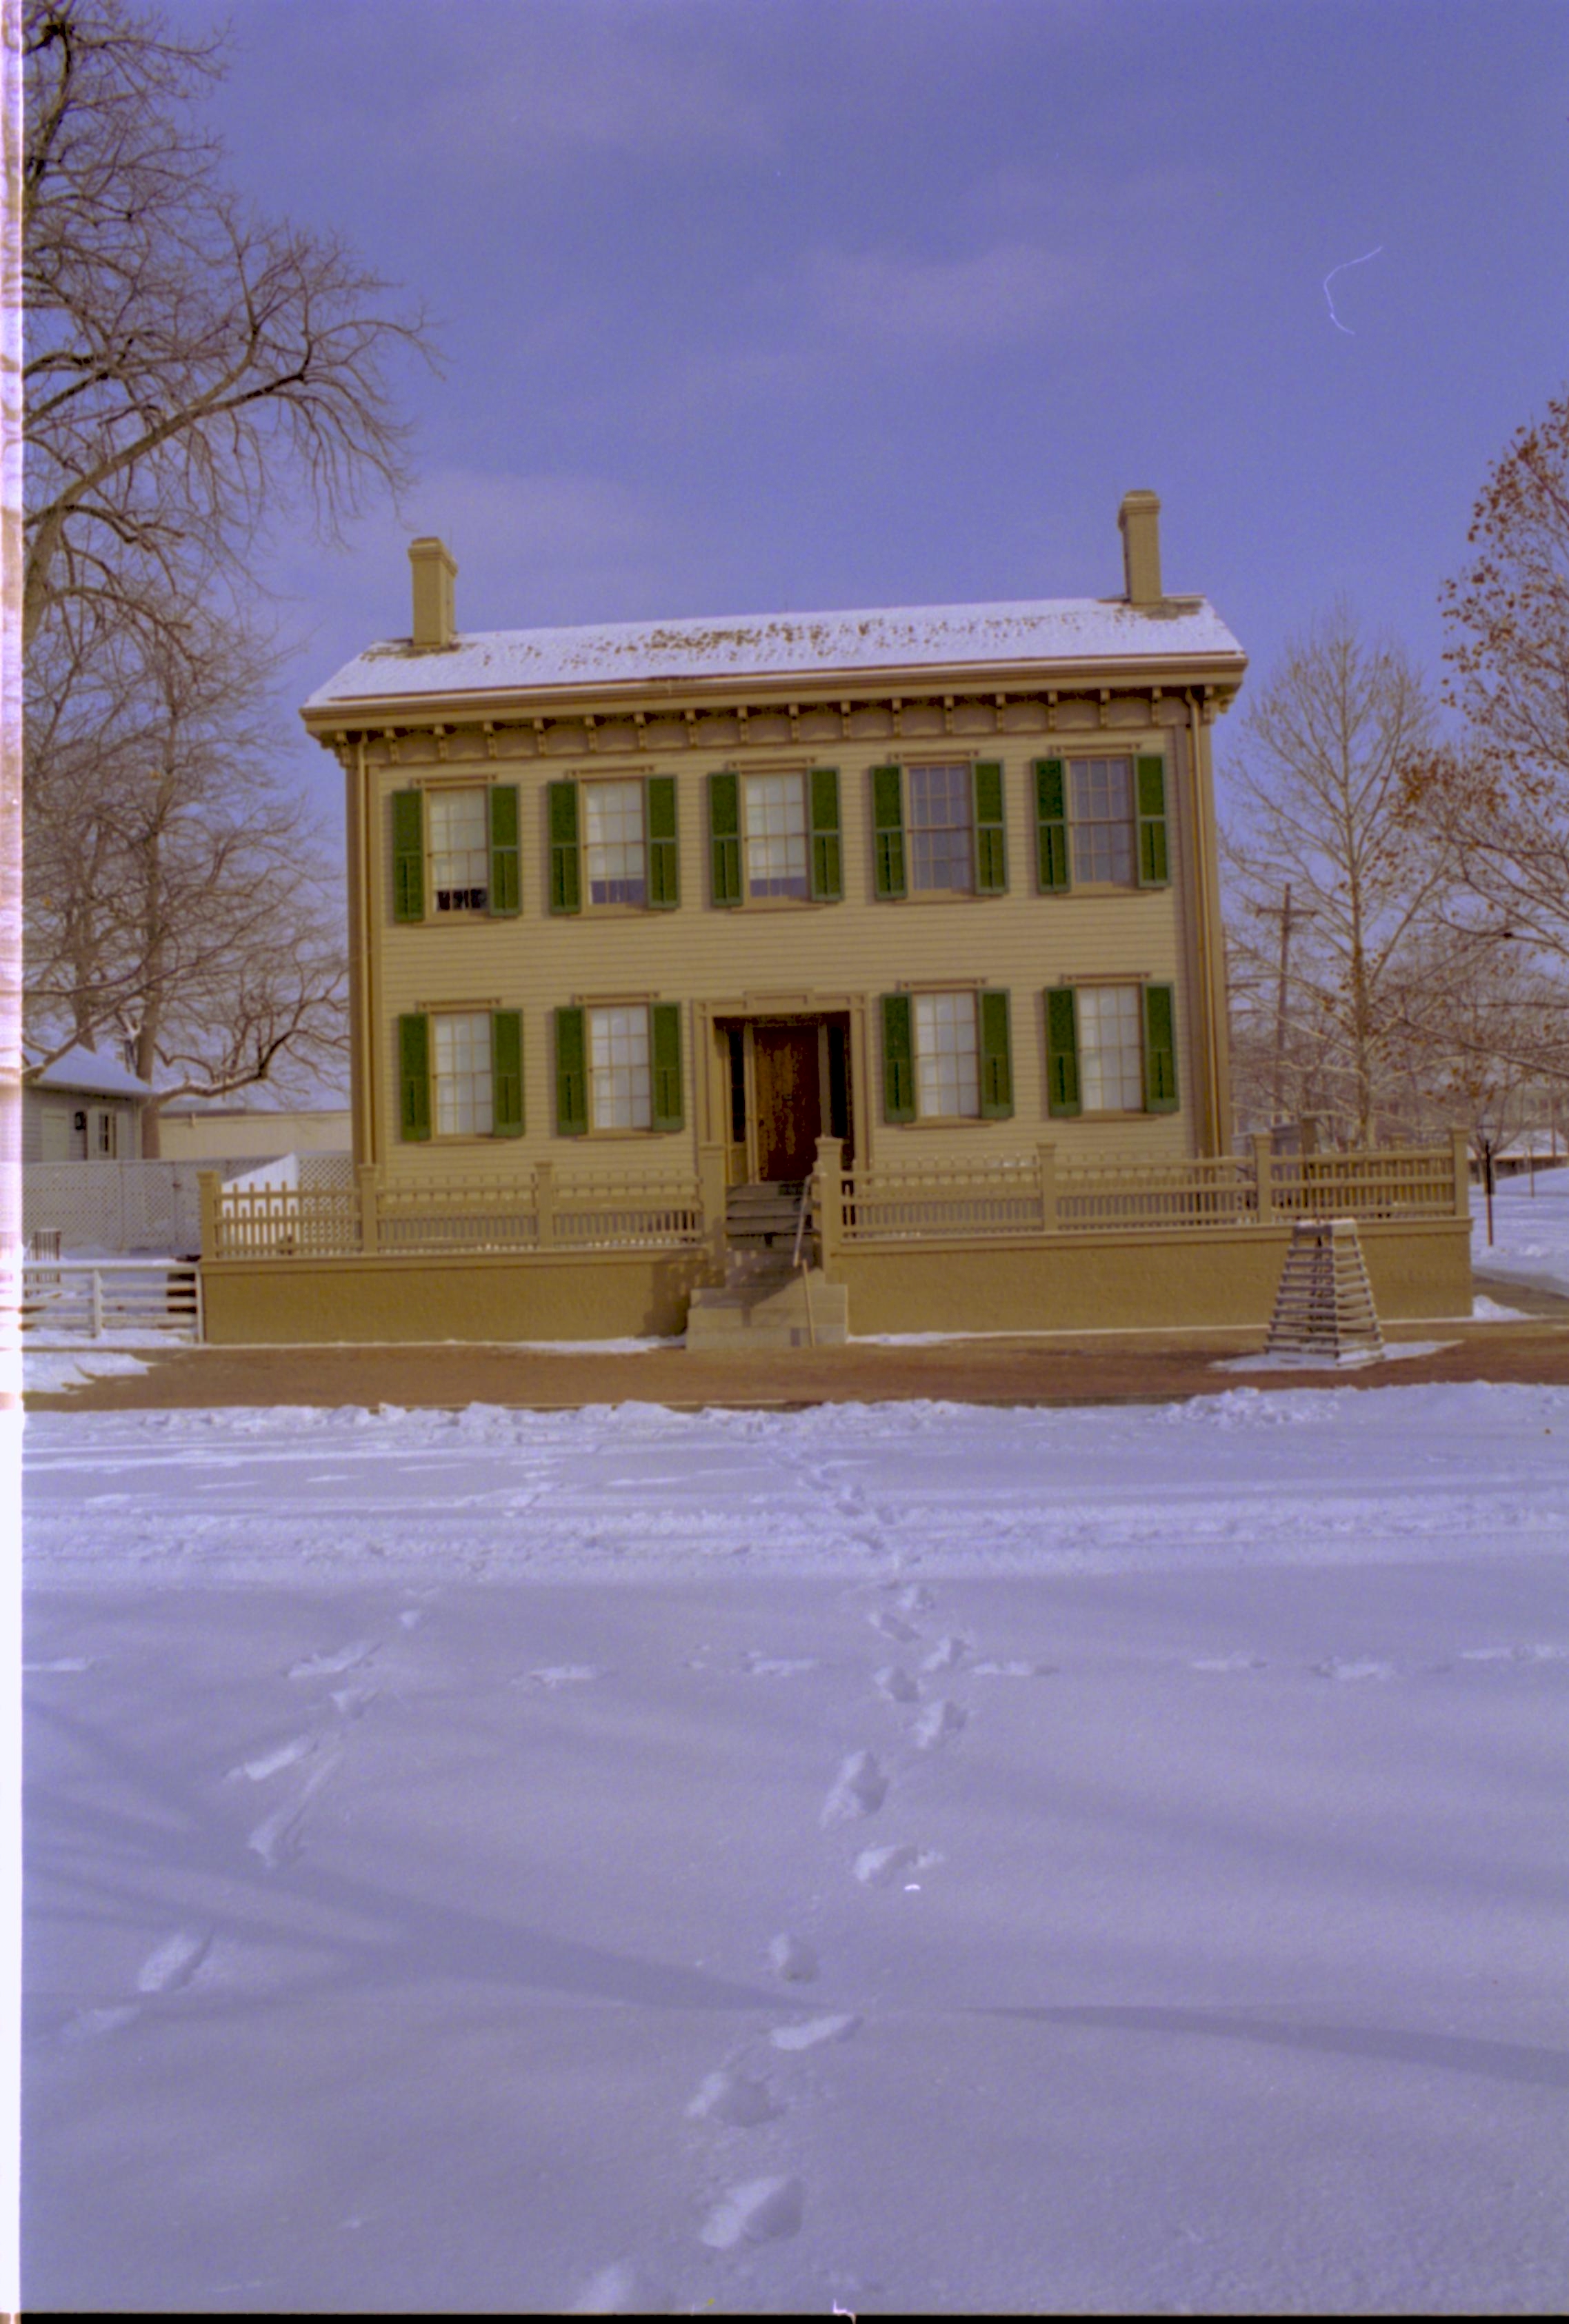 Lincoln Home in snow, cleared brick plaza in front, elm tree in cage on right. Corneau House on left, B-2 in background left. Maintenance vehicle tracks and footprints in snow throughout. Looking East from 8th Street snow, Lincoln Home, Corneau, B-2, 8th Street, brick plaza, elm tree